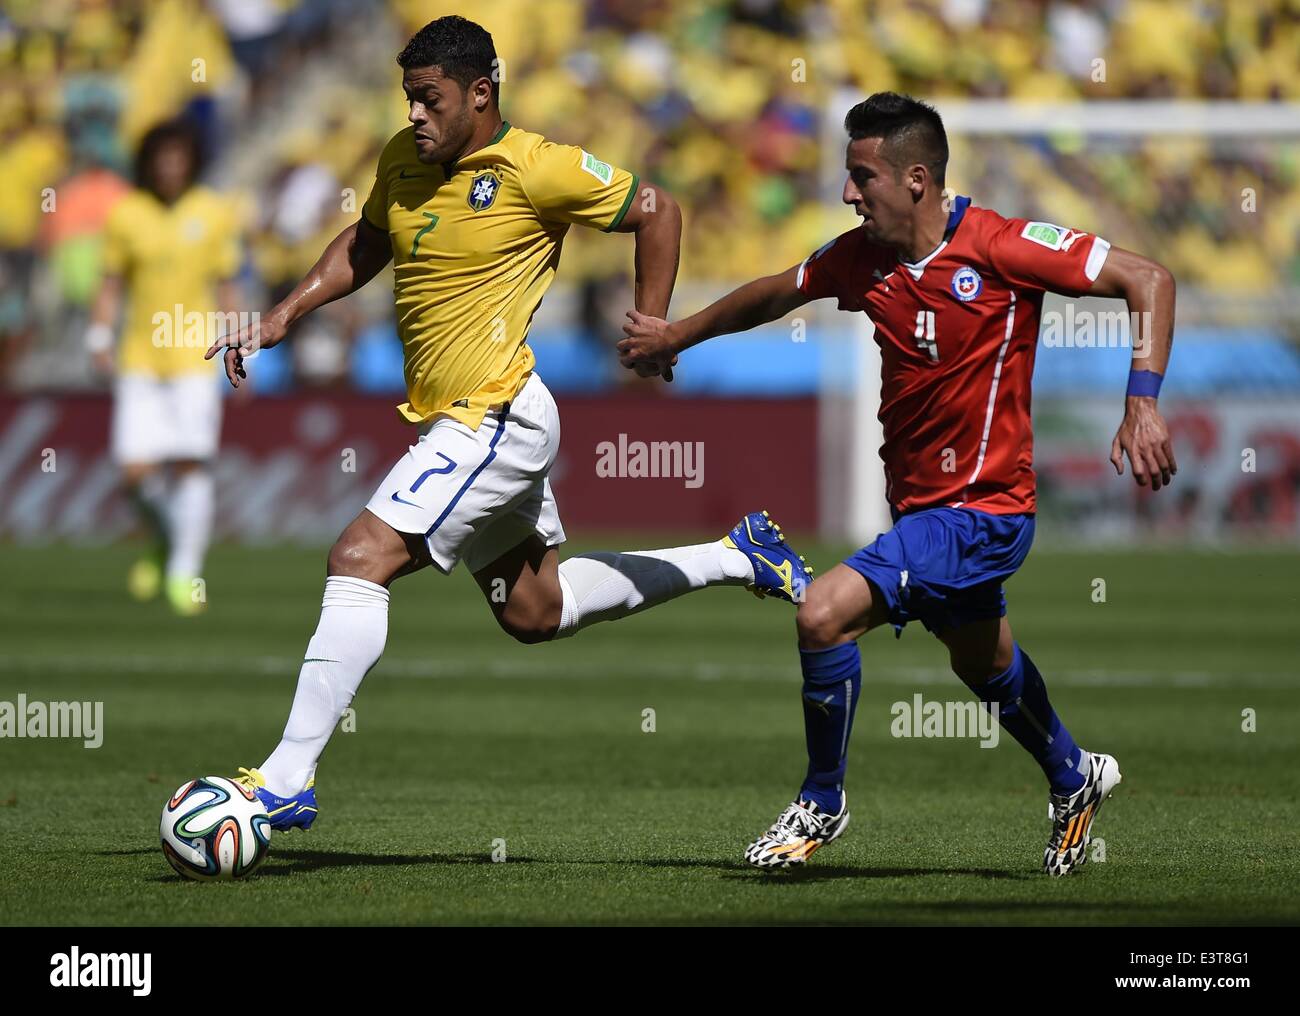 Belo Horizonte, Brazil. 28th June, 2014. Brazil's Hulk (L) vies with Chile's Mauricio Isla during a Round of 16 match between Brazil and Chile of 2014 FIFA World Cup at the Estadio Mineirao Stadium in Belo Horizonte, Brazil, on June 28, 2014. Credit:  Qi Heng/Xinhua/Alamy Live News Stock Photo